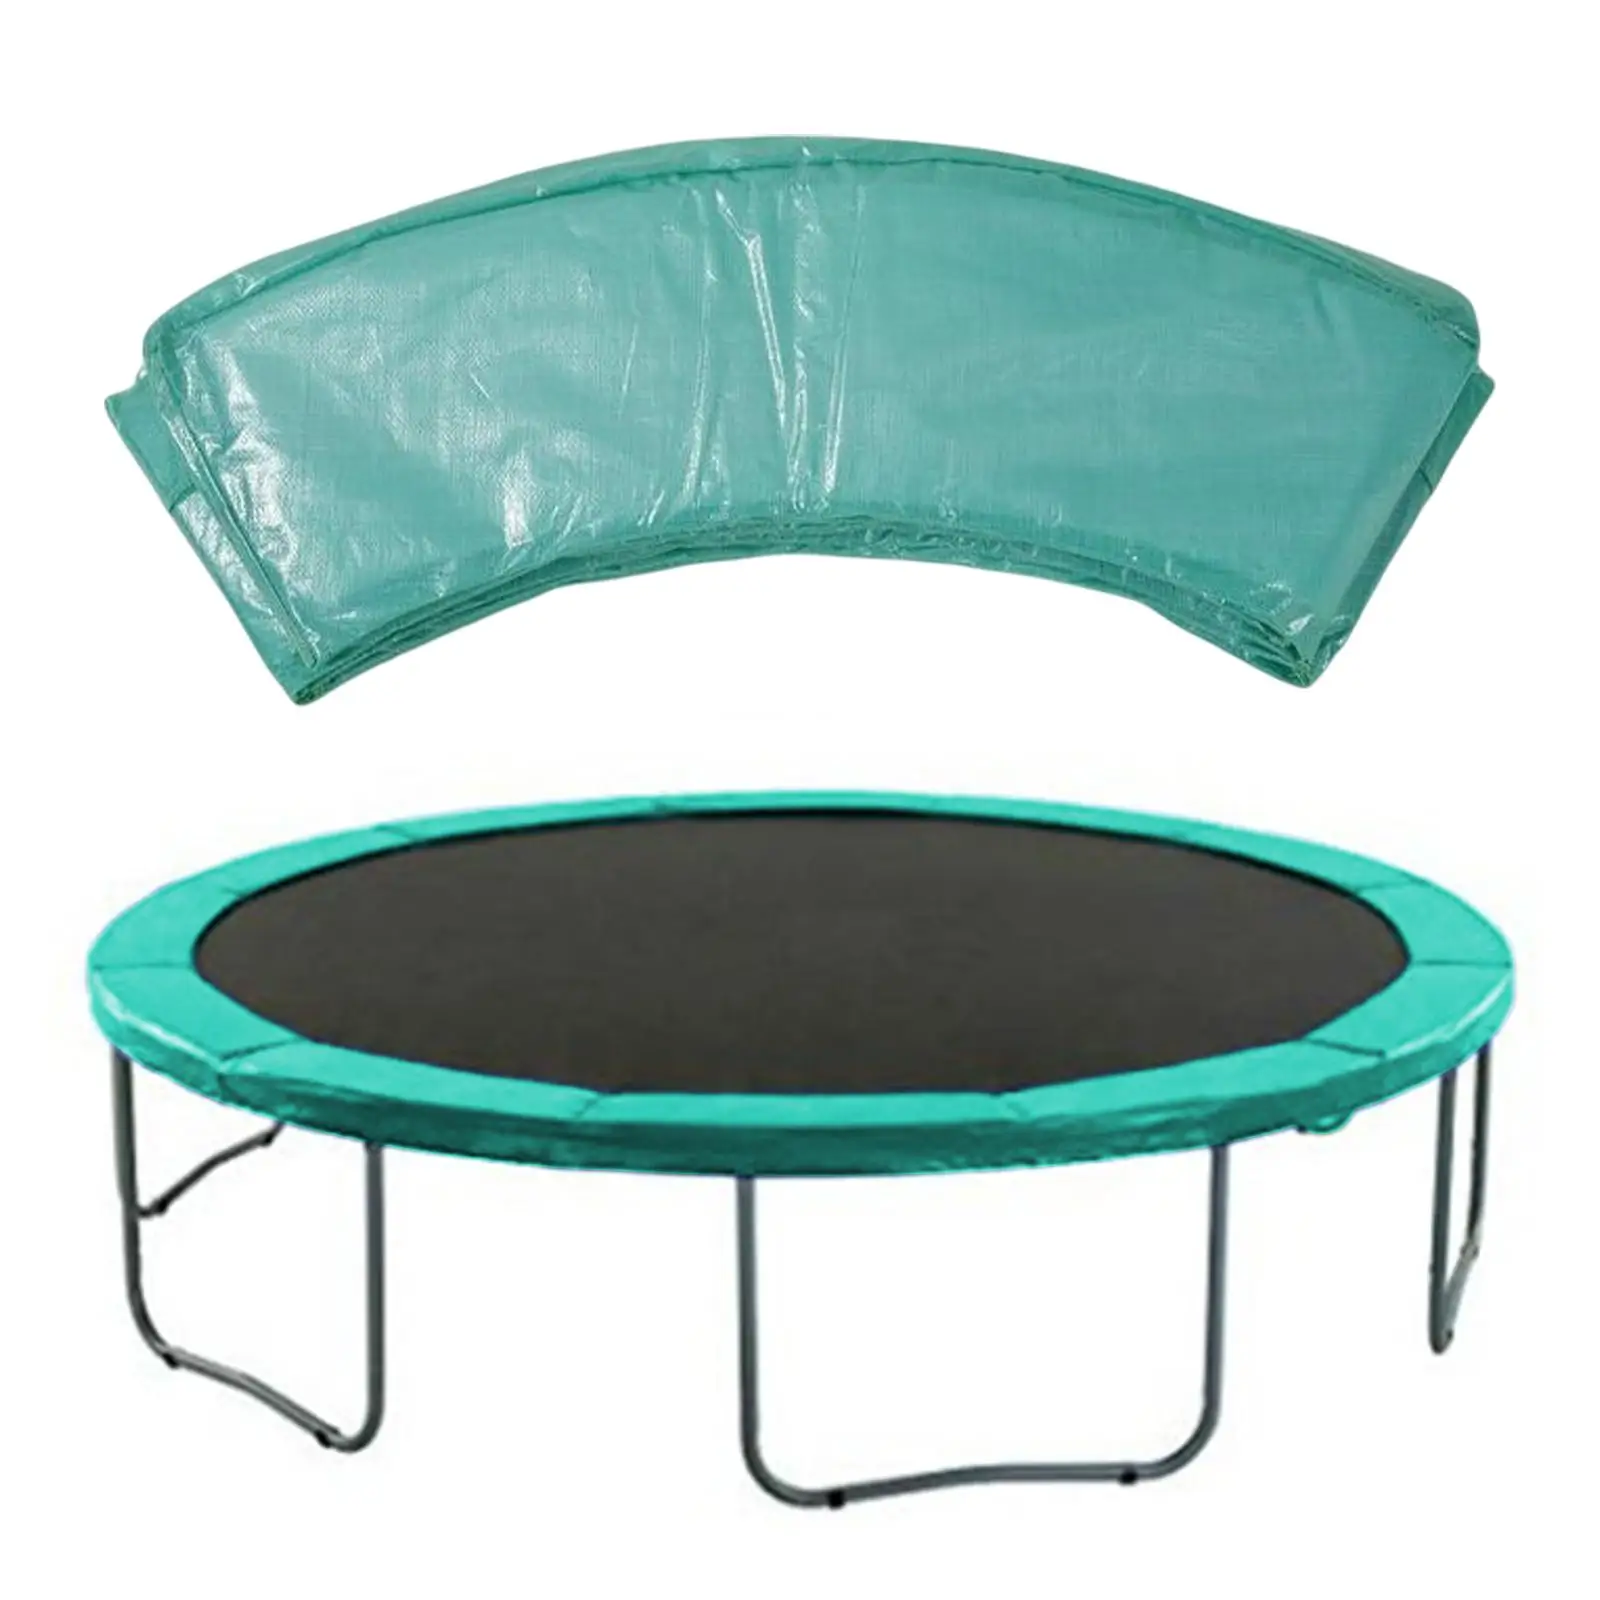 Trampoline Replacement Pad, Safety Spring Cover, Waterproof Trampoline Protection Mat